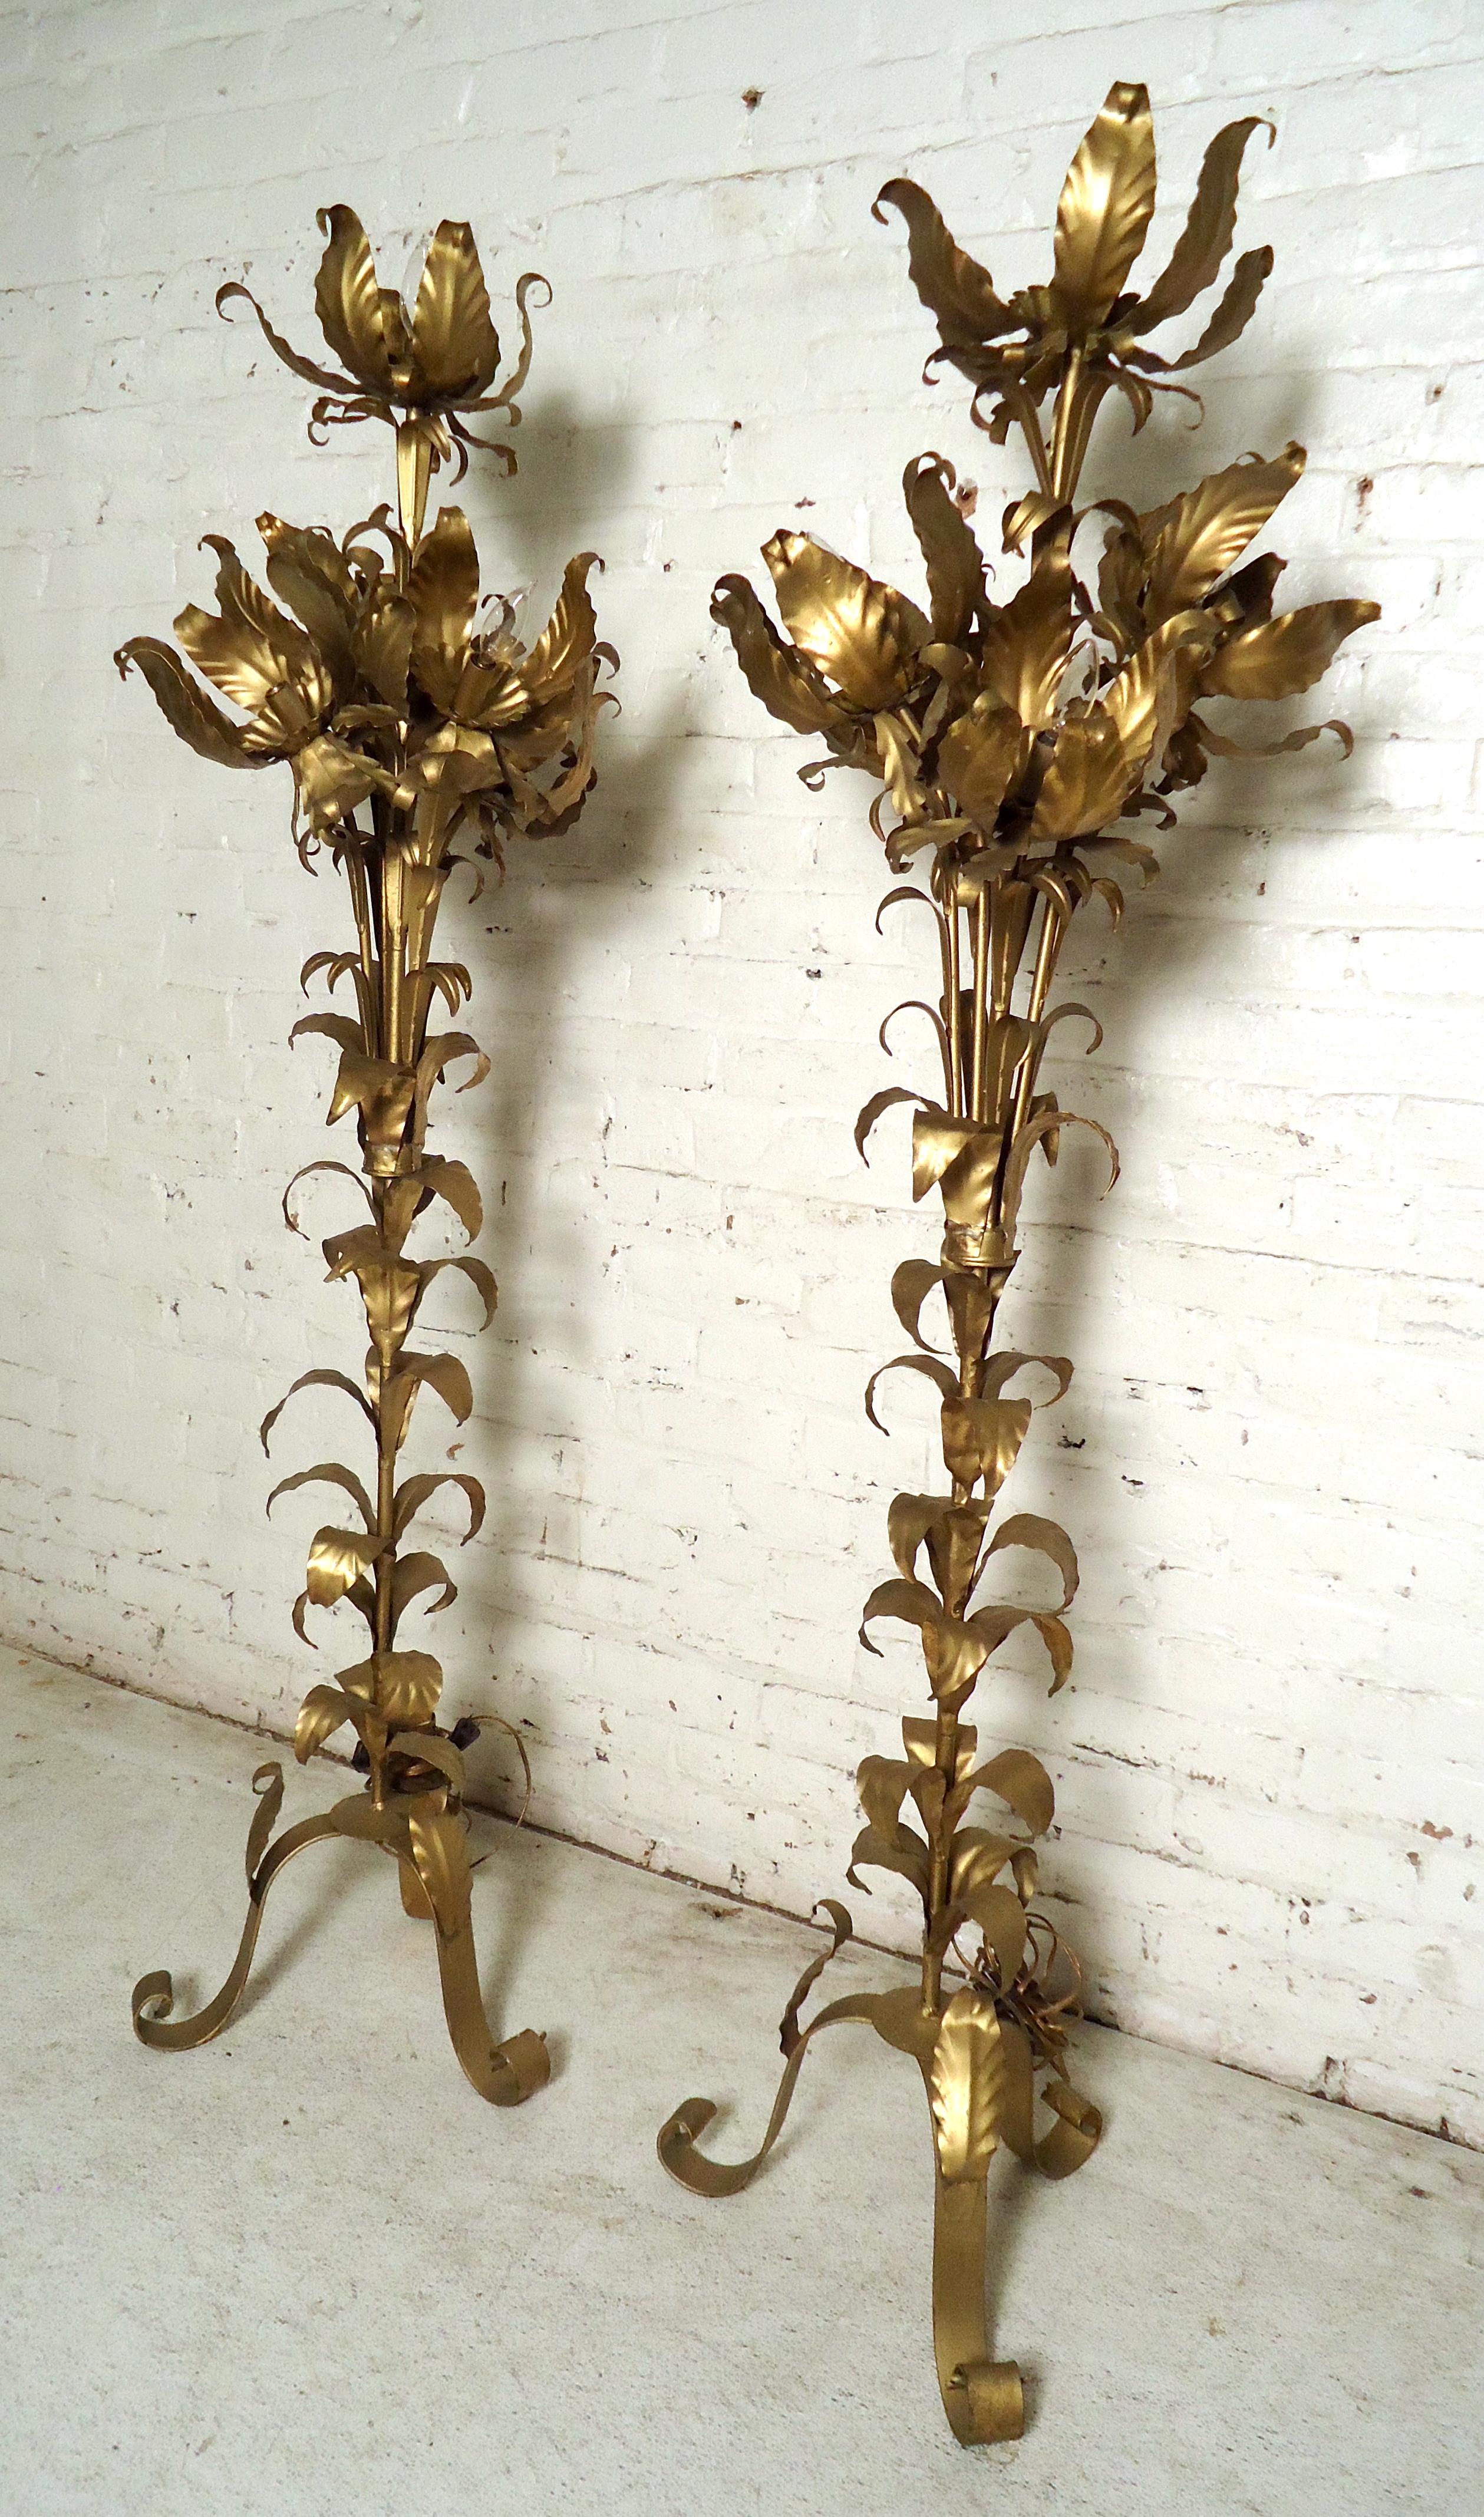 Unique pair of vintage modern floor lamps featuring bent metal leaves throughout in a brass finish 
(Please confirm item location - NY or NJ with dealer).